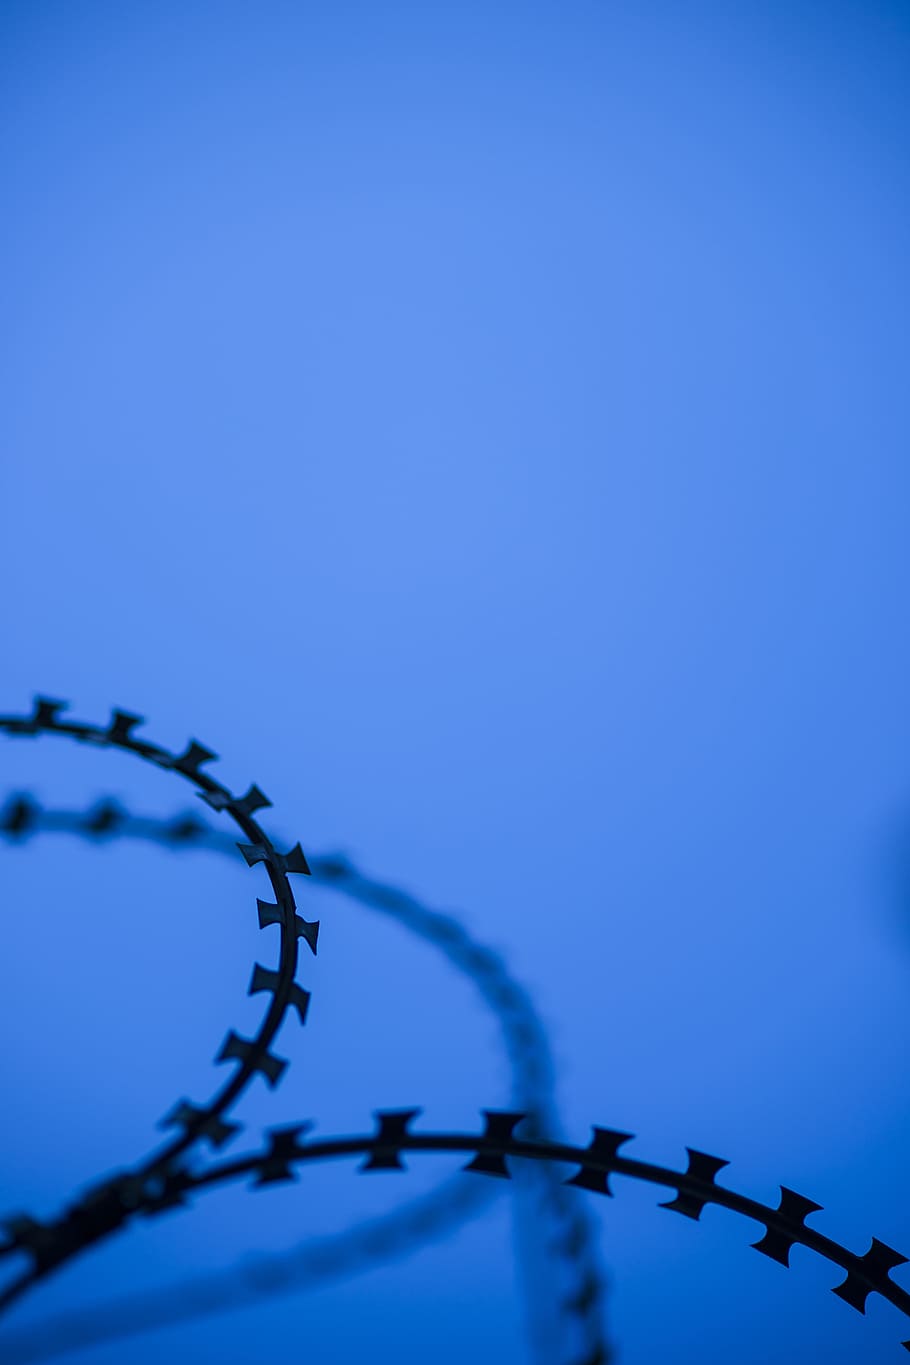 barbed wire, sharp, razor, danger, blue, military, war, backgrounds, sky, abstract pattern